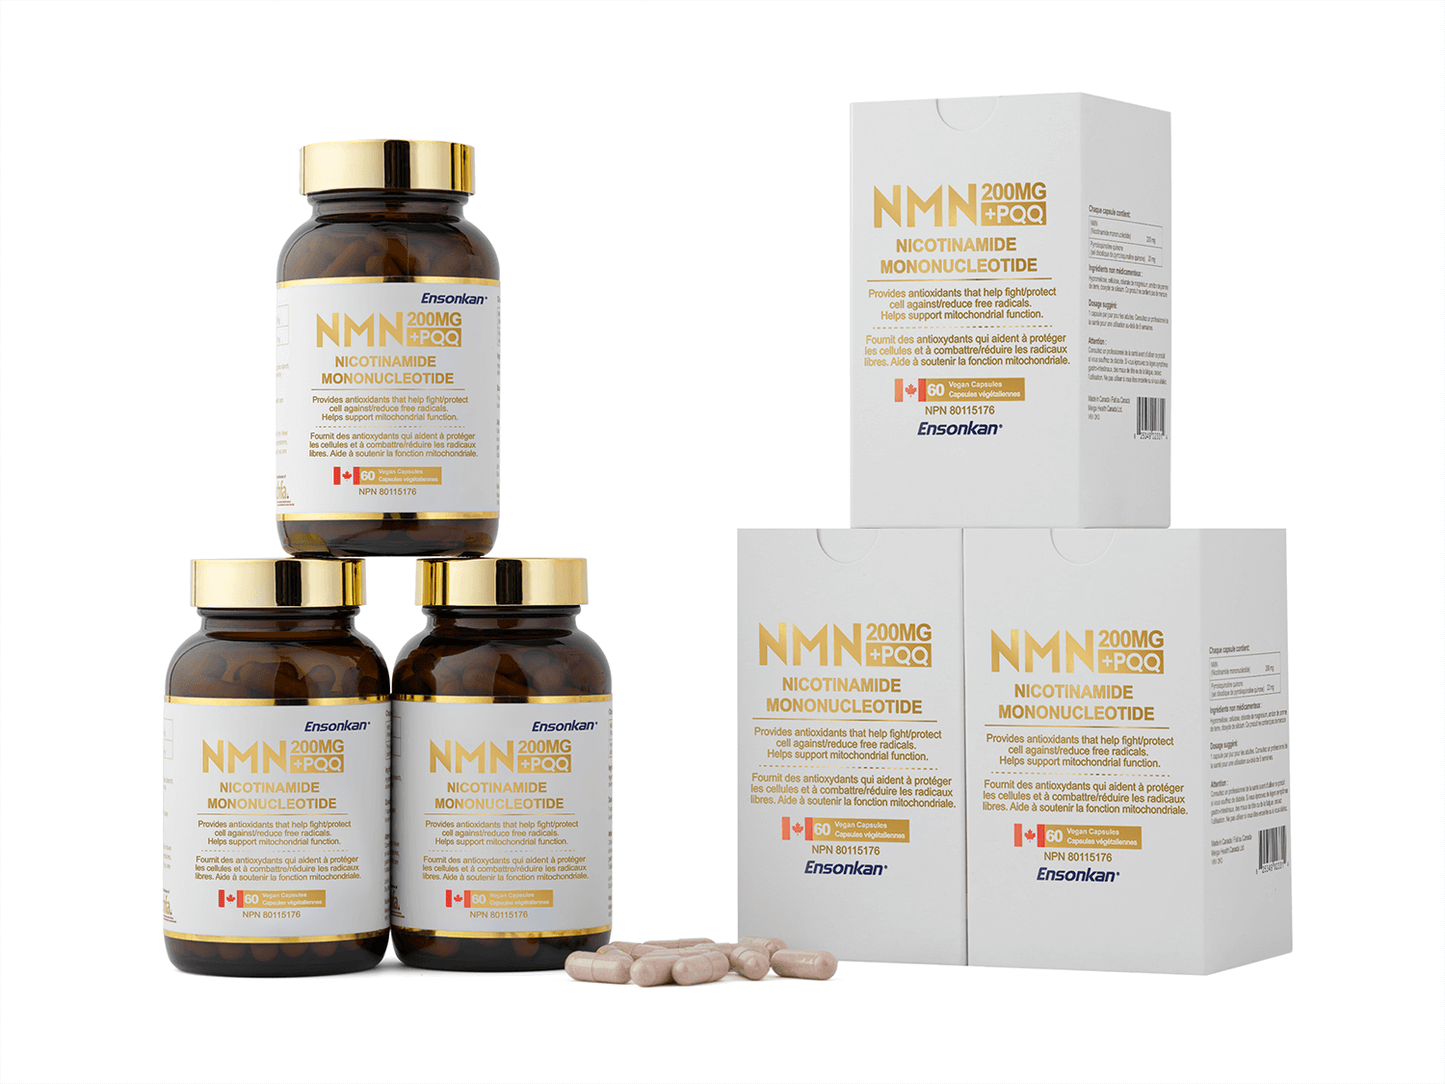 Ensonkan NMN 200mg + PQQ 20mg Capsule - 3 Bottles (Mother's Day Special: 75 Capsules)